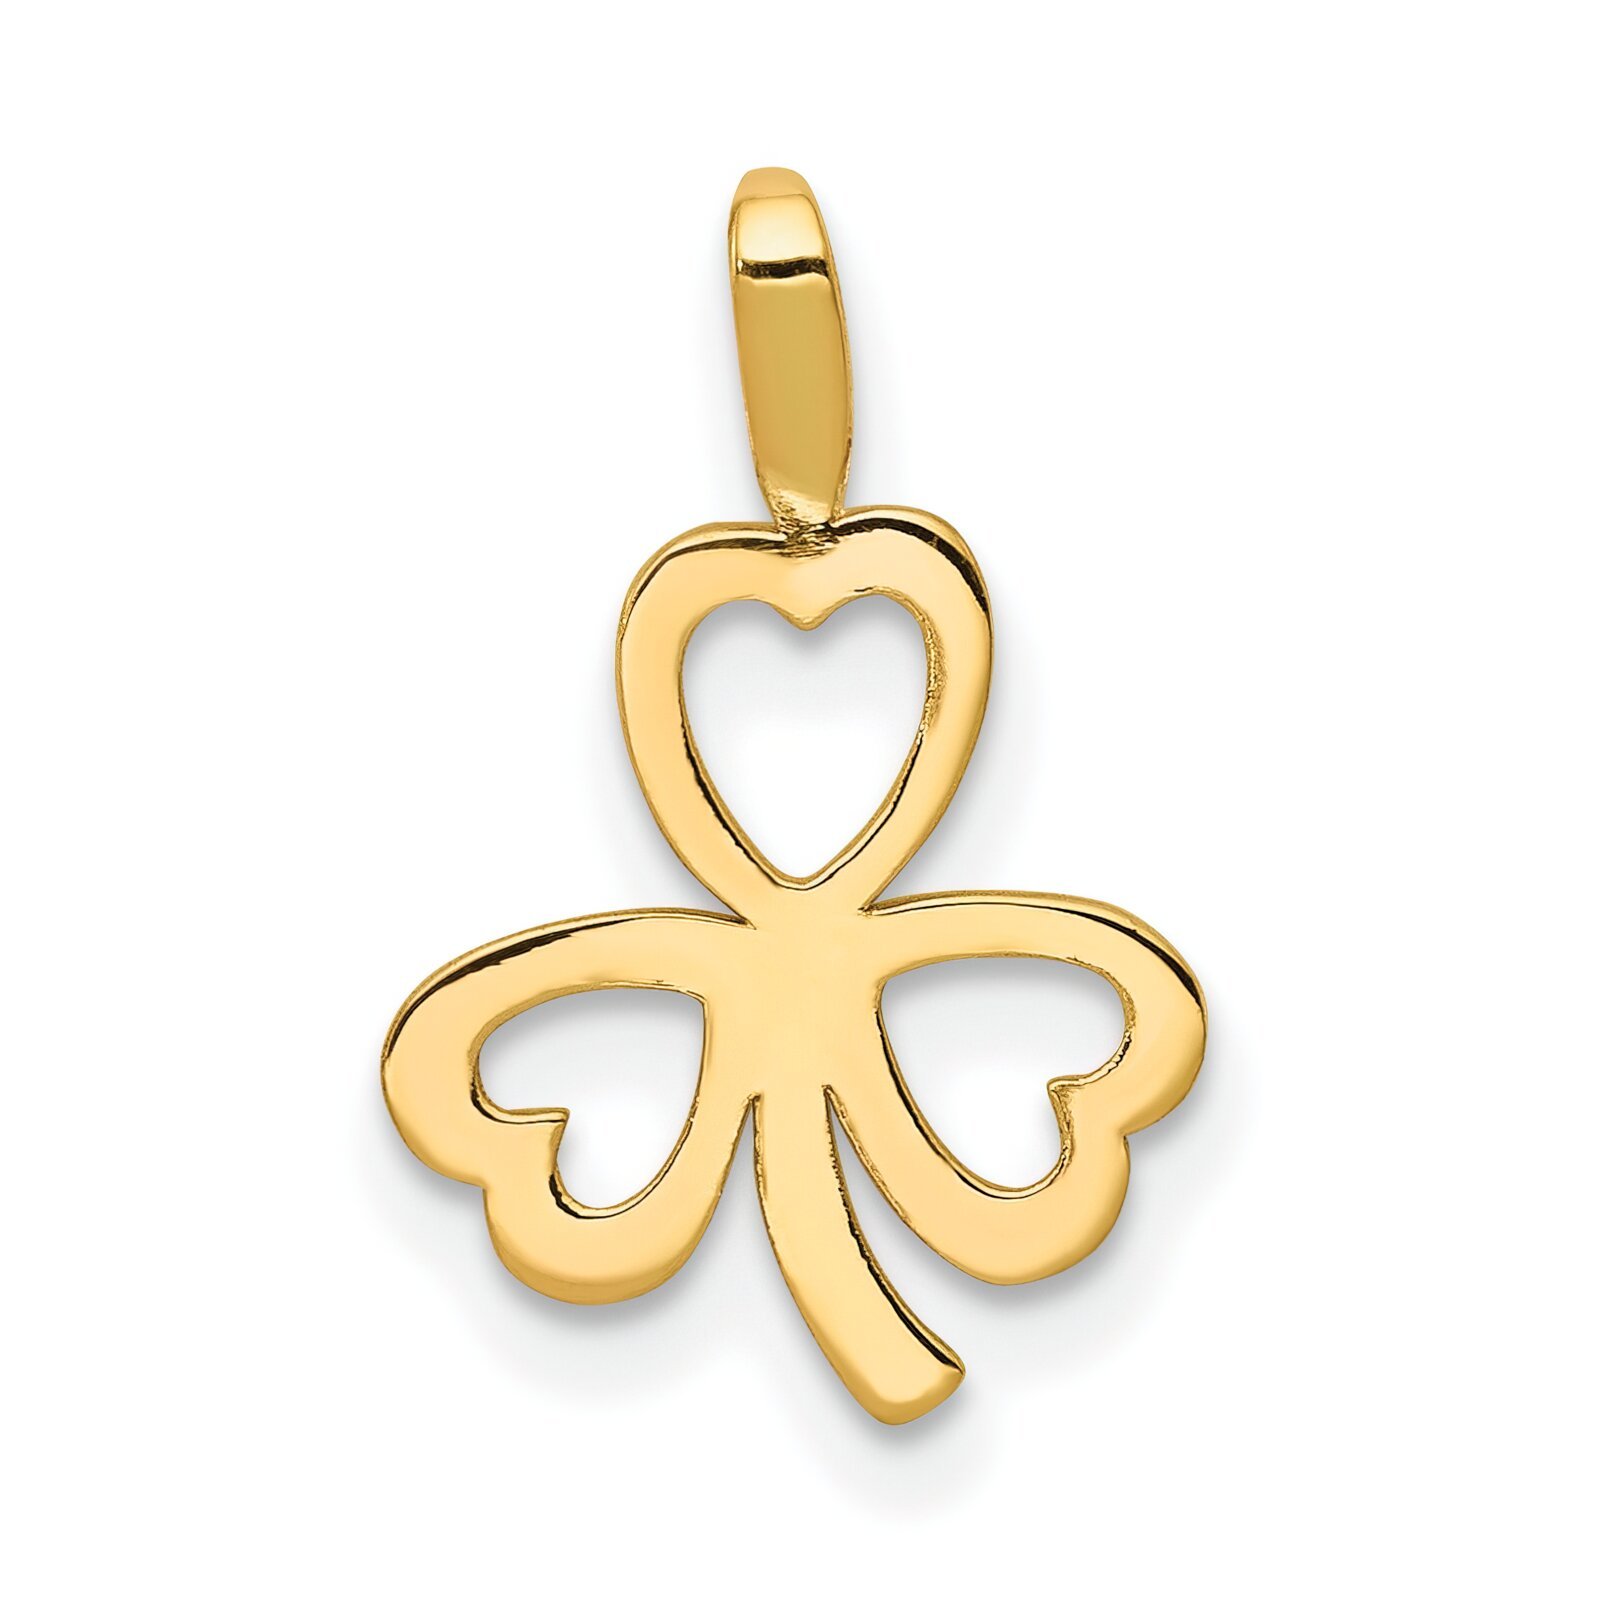 Primary image for 14K Gold Heart Clover Charm Pendant Jewelry 15mm x 10mm